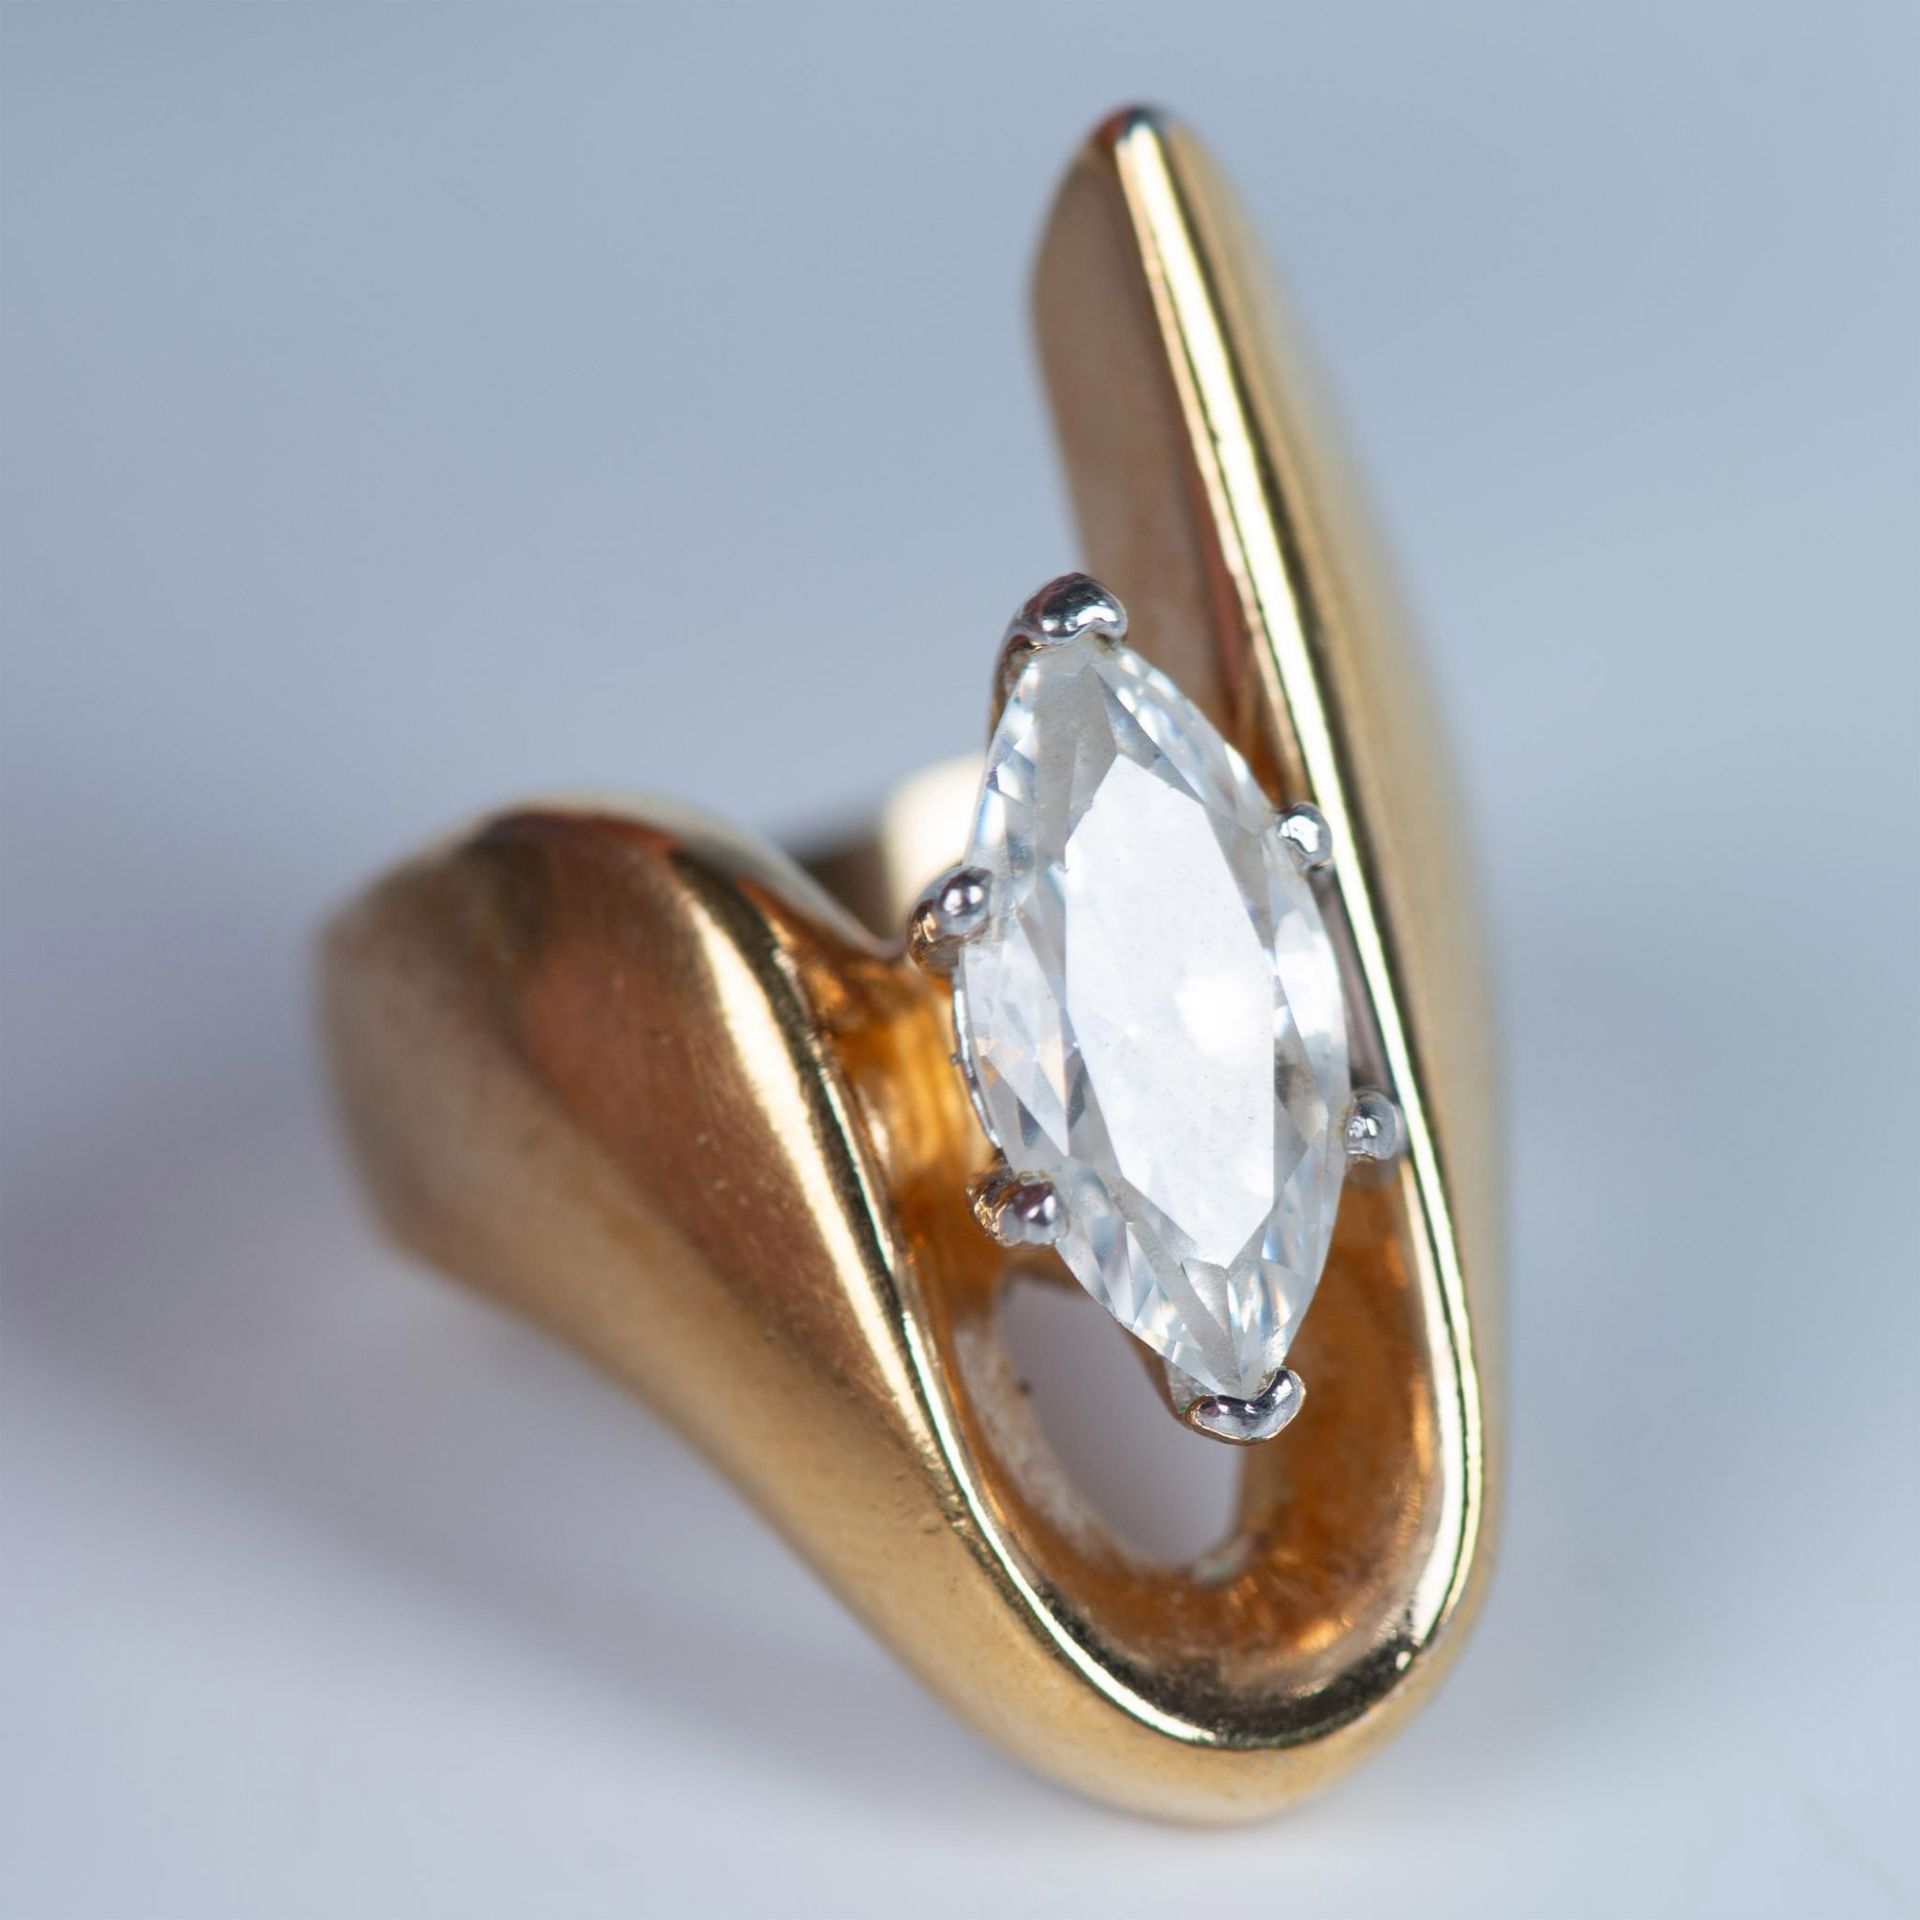 Beautiful 18K HGE Gold & Marquise-Cut Crystal Ring - Image 2 of 4